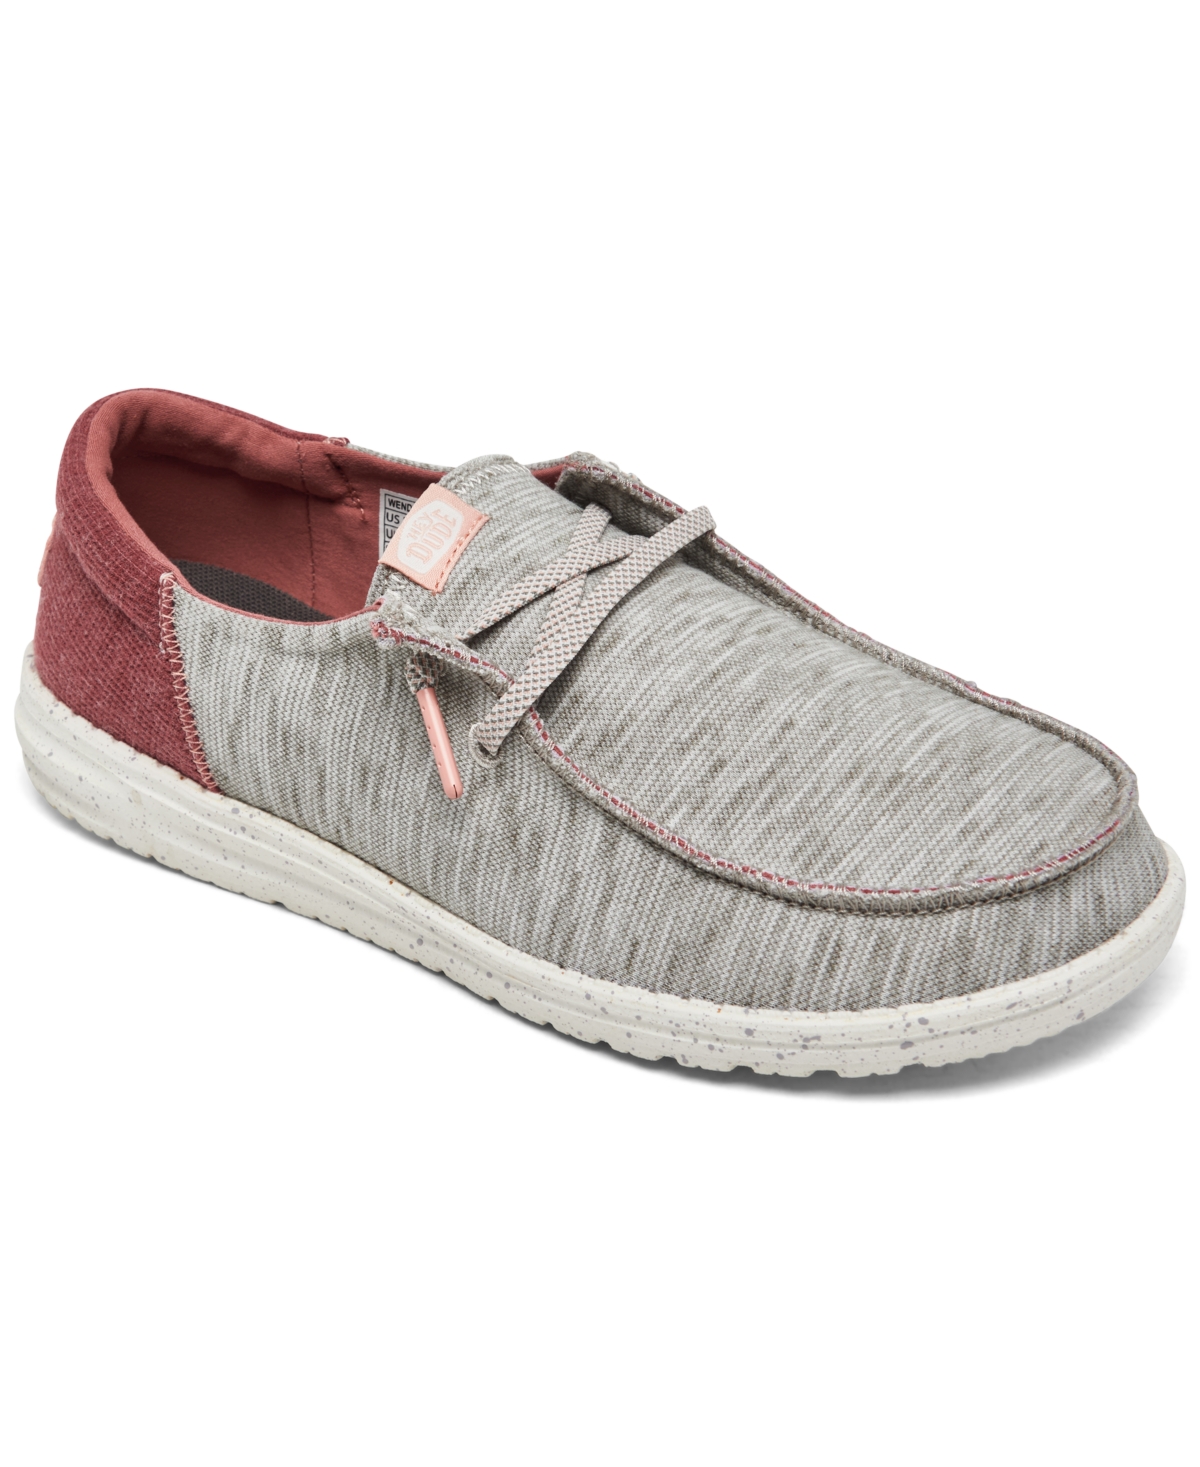 Women's Wendy Funk Mono Casual Moccasin Sneakers from Finish Line - Light Gray